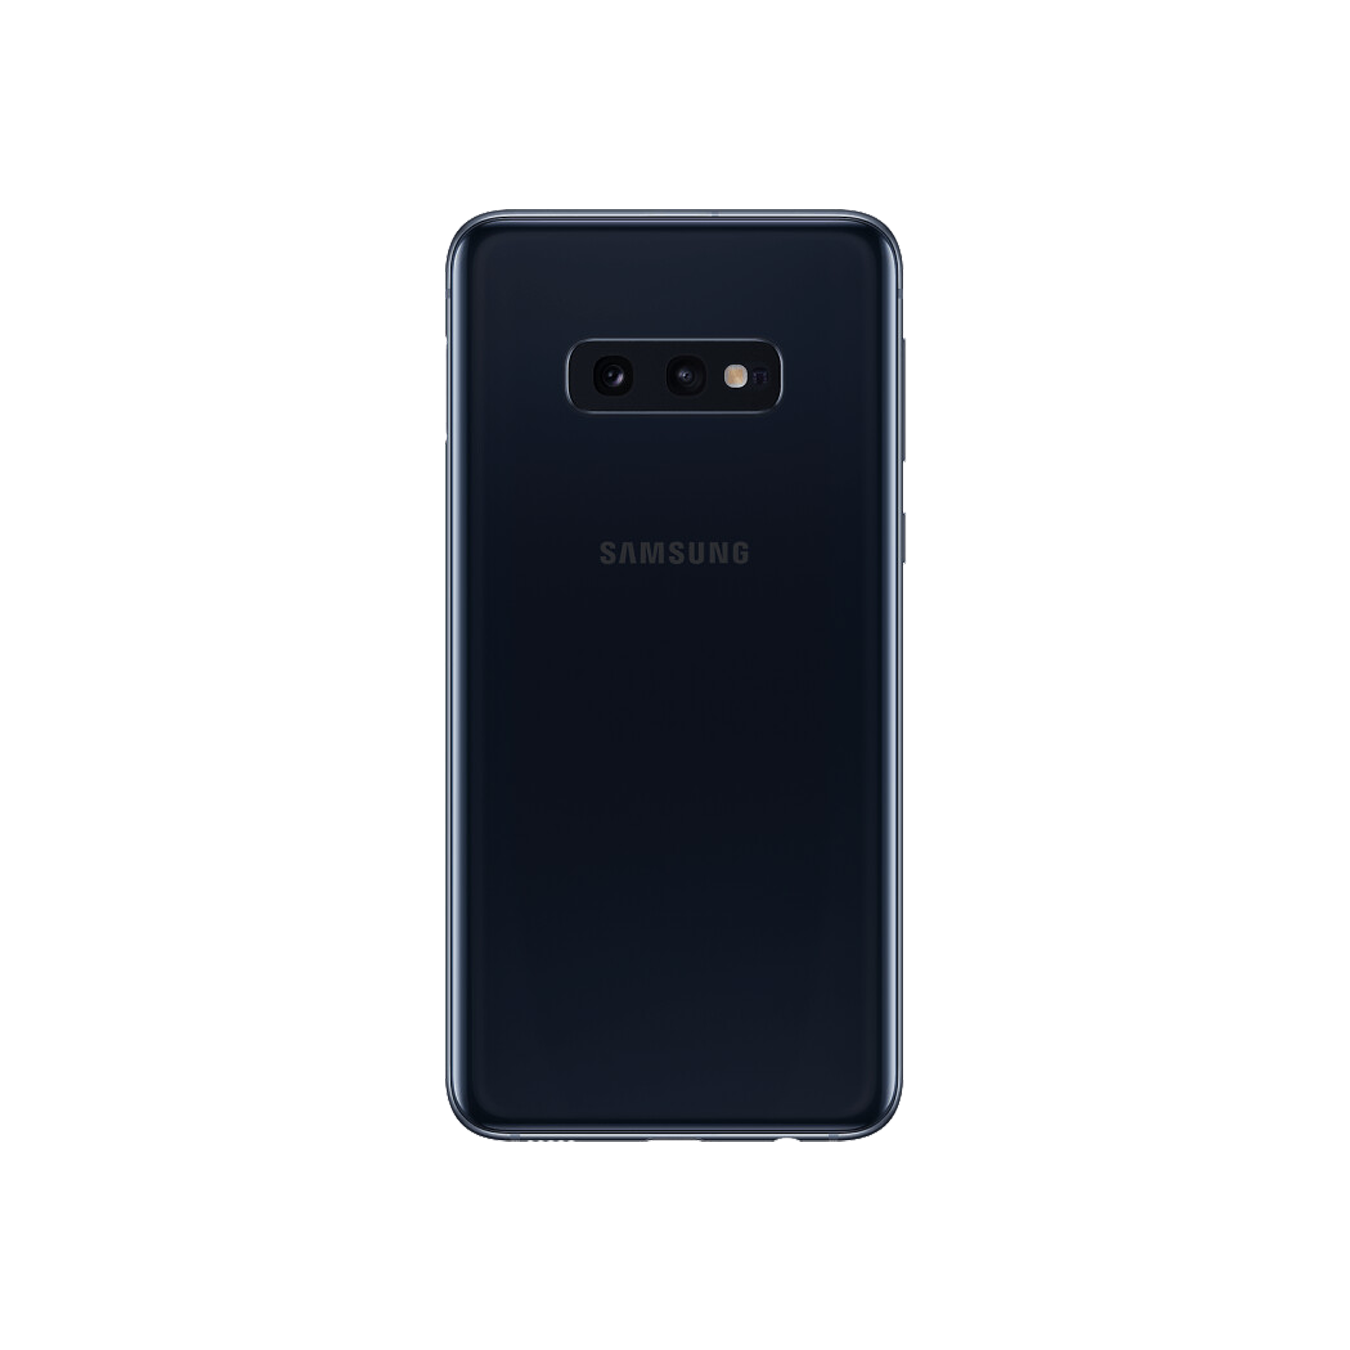 Samsung Galaxy S10E network unlock, remove SIM restrictions for global use, available at cleanimei.com